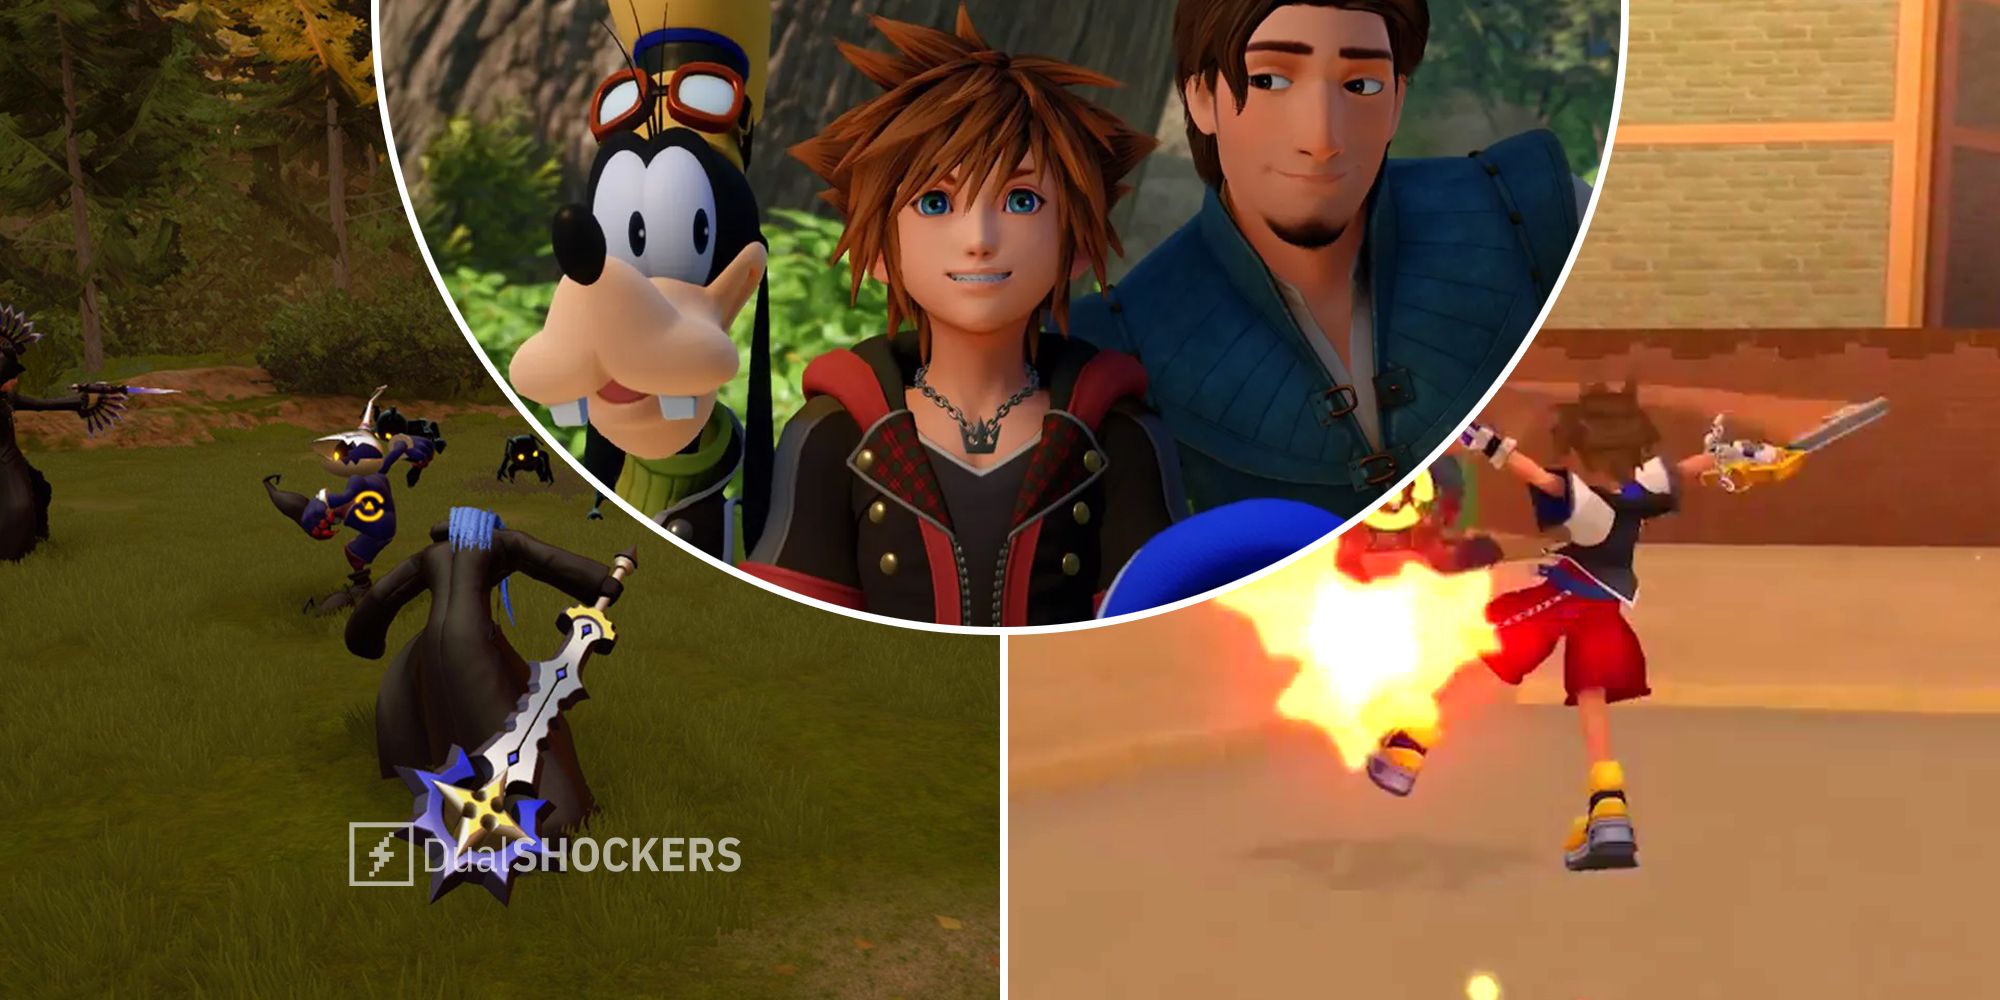 The Best Kingdom Hearts Games - But Why Tho?